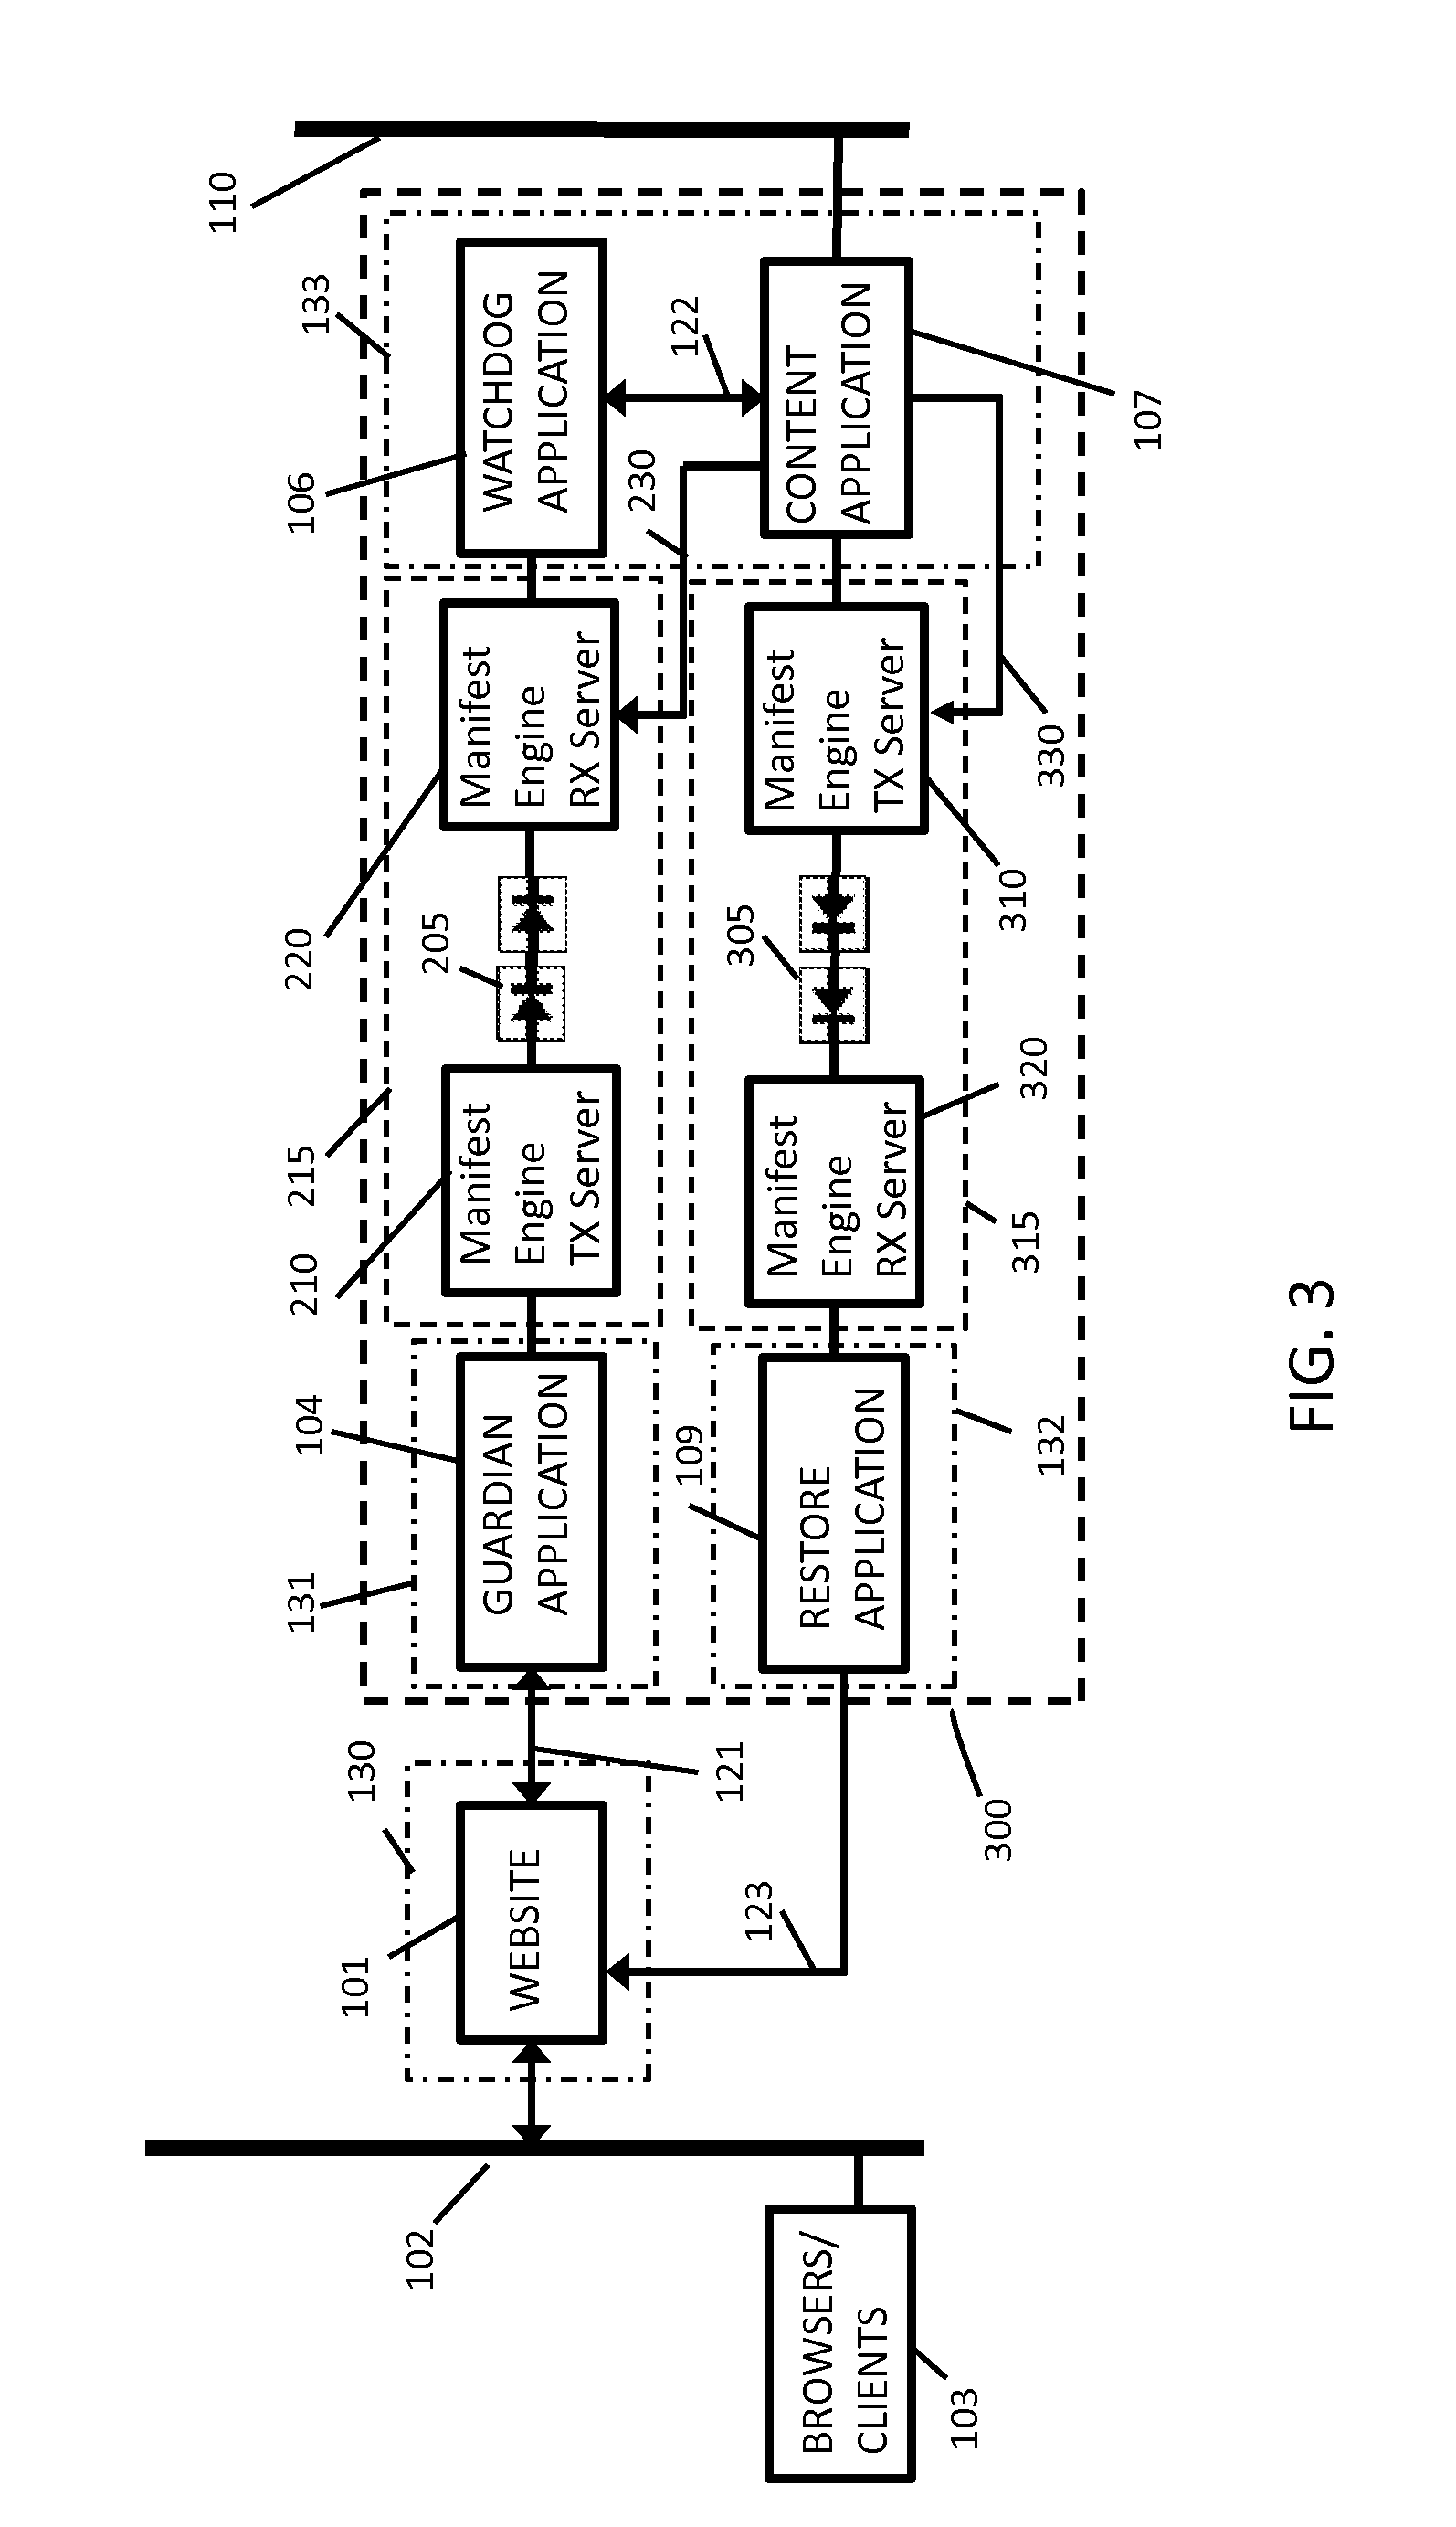 System and method for improving the resiliency of websites and web services